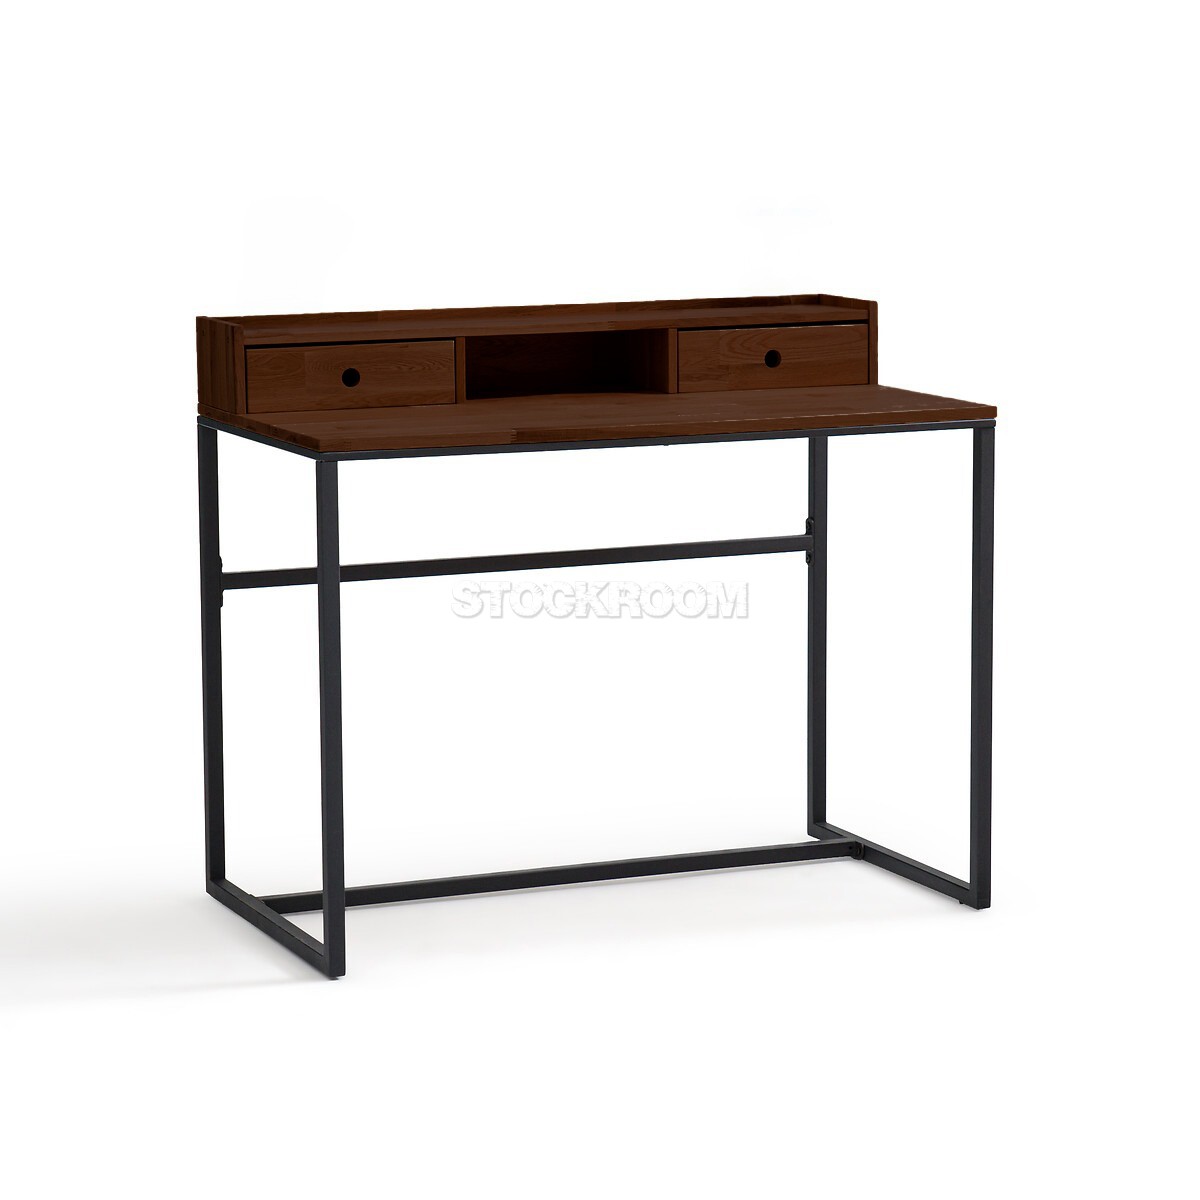 Bryson Study Desk With Drawers